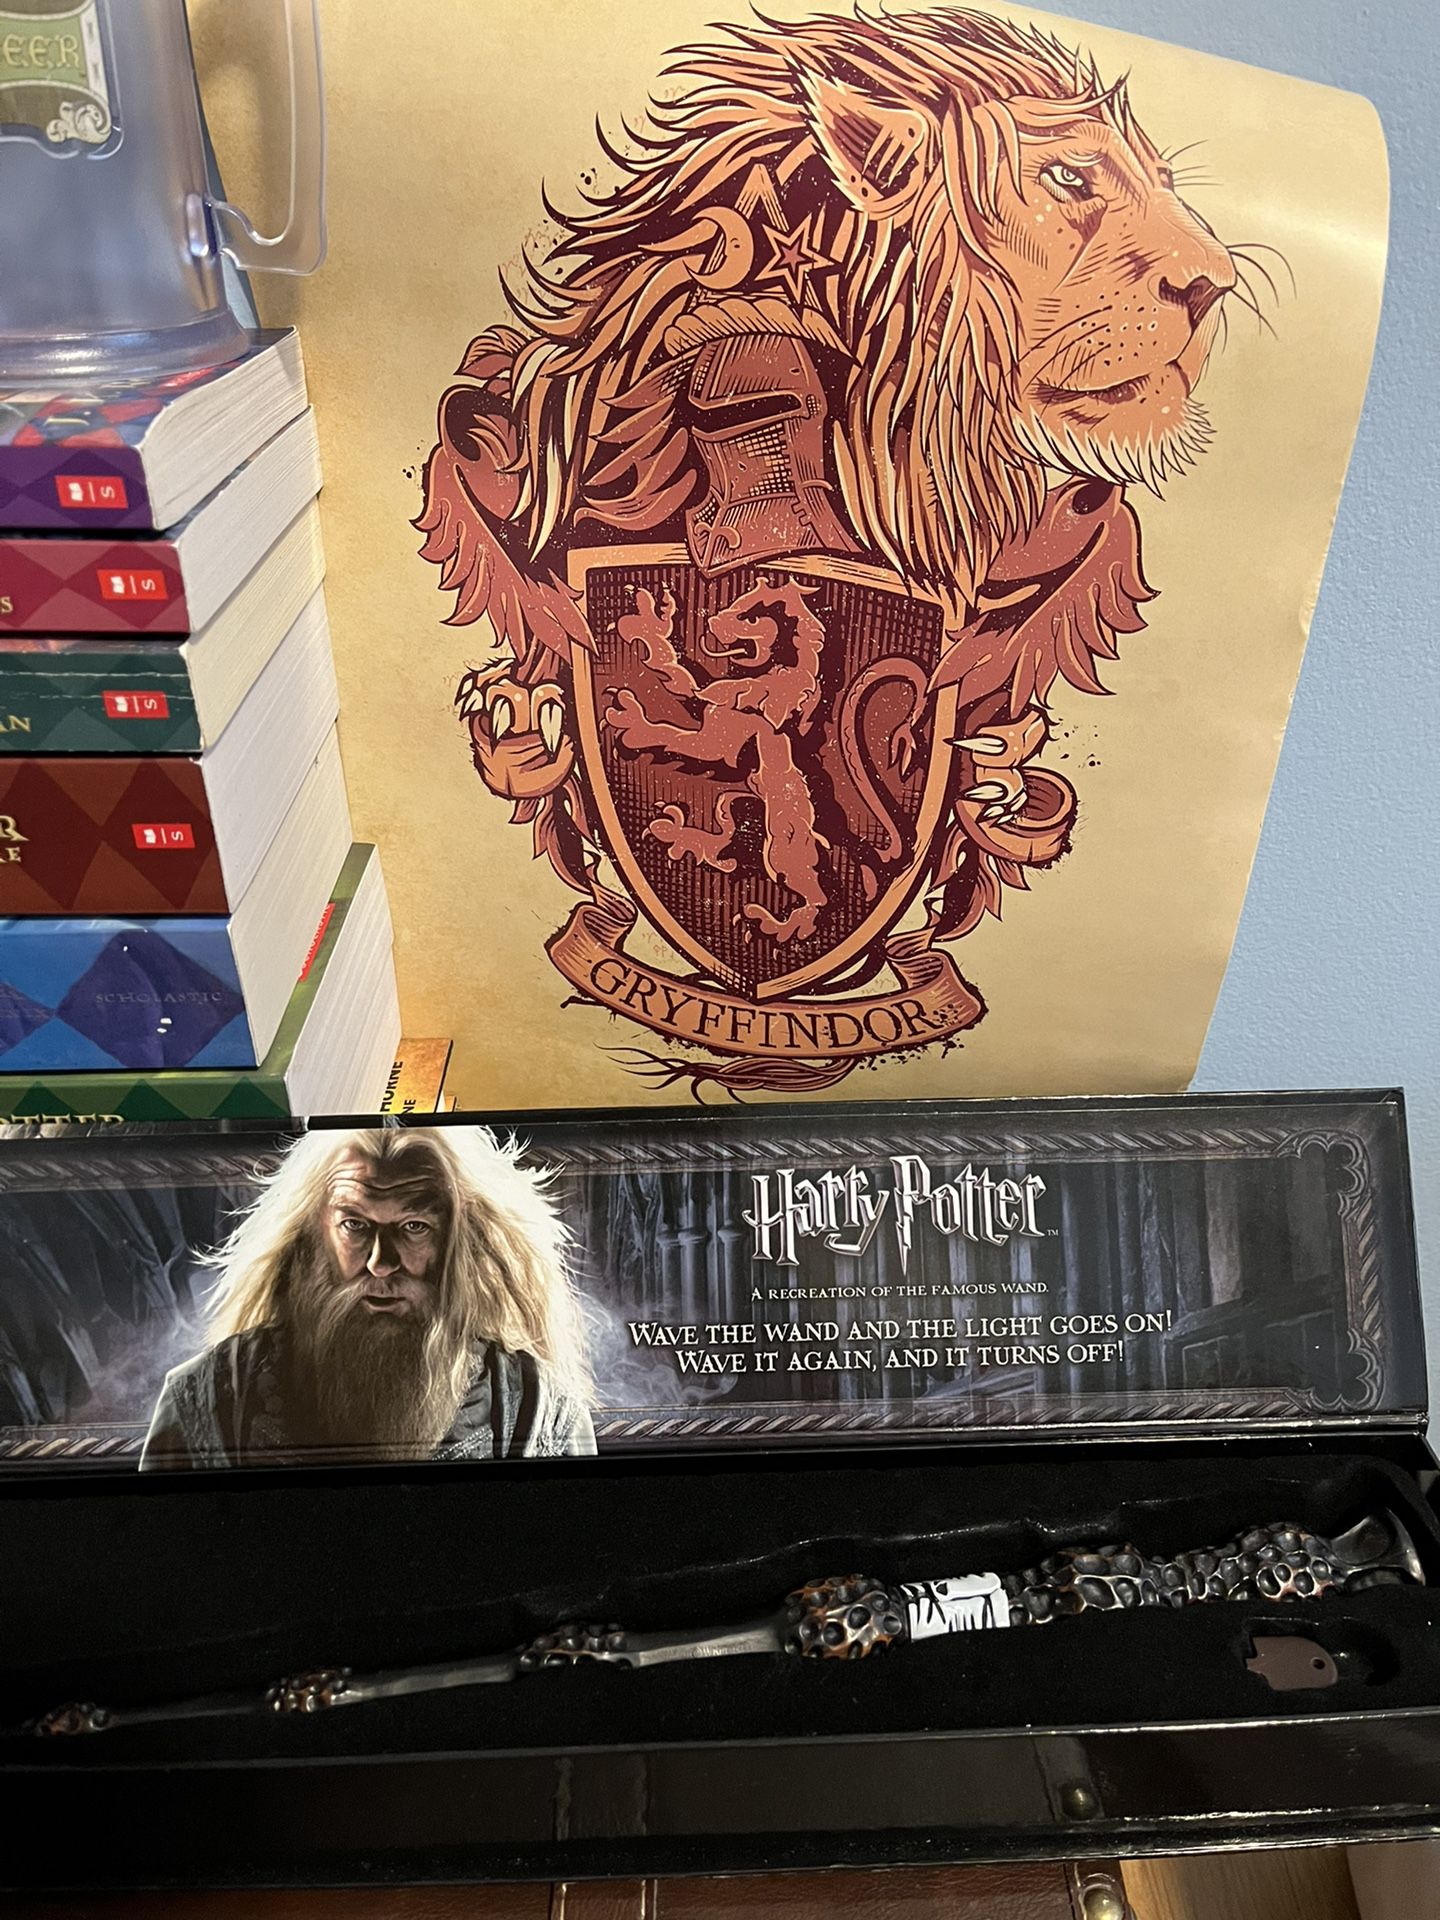 Lots of Harry Potter Merch and Collectibles 